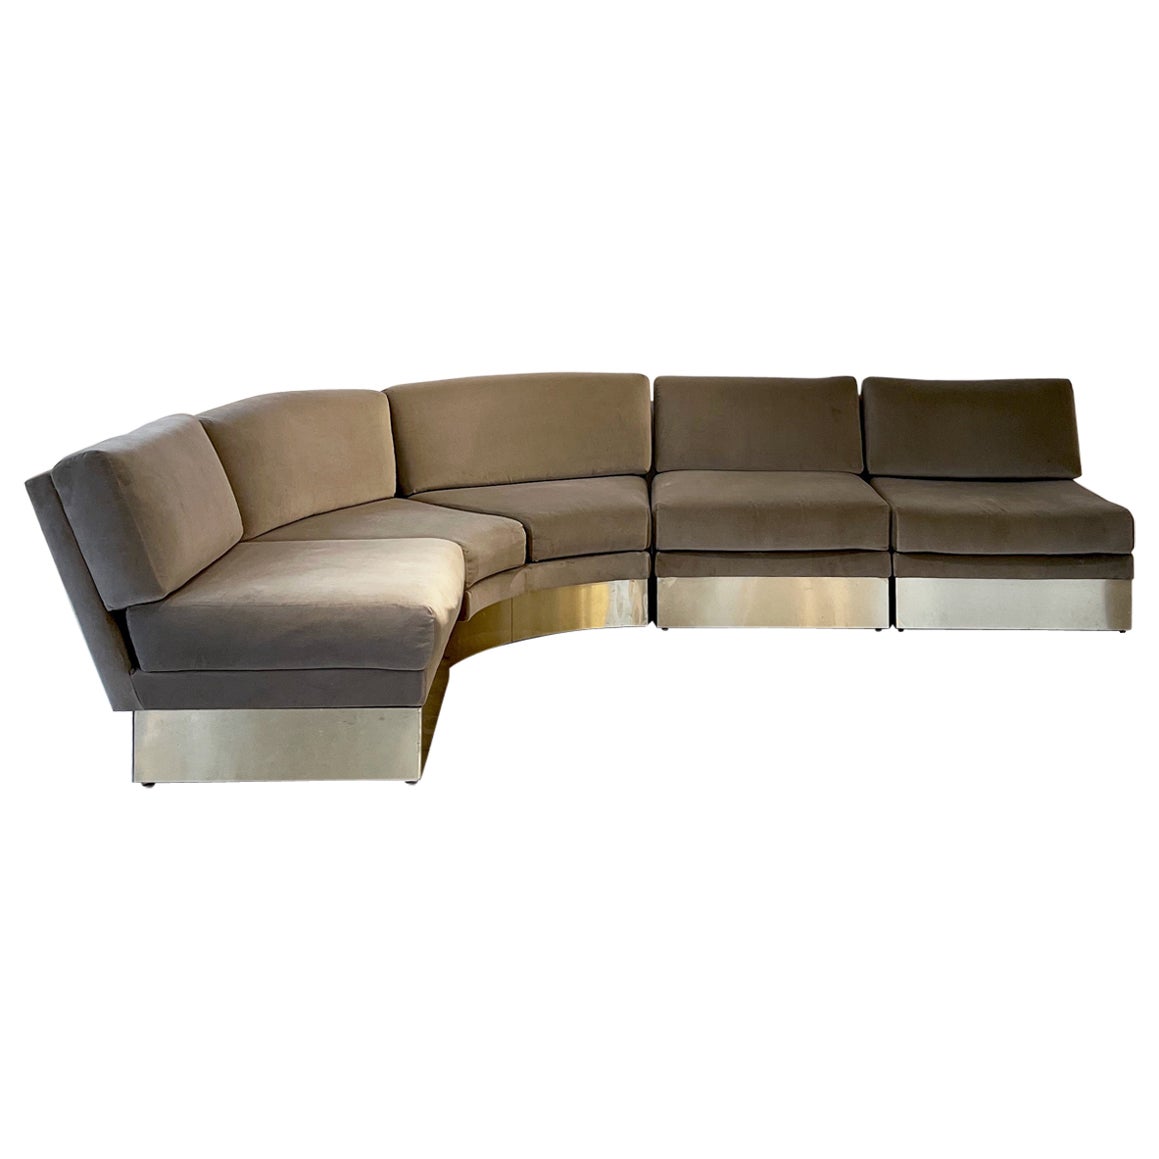 California Corner sofa by Jacques Charpentier from the 1970s For Sale